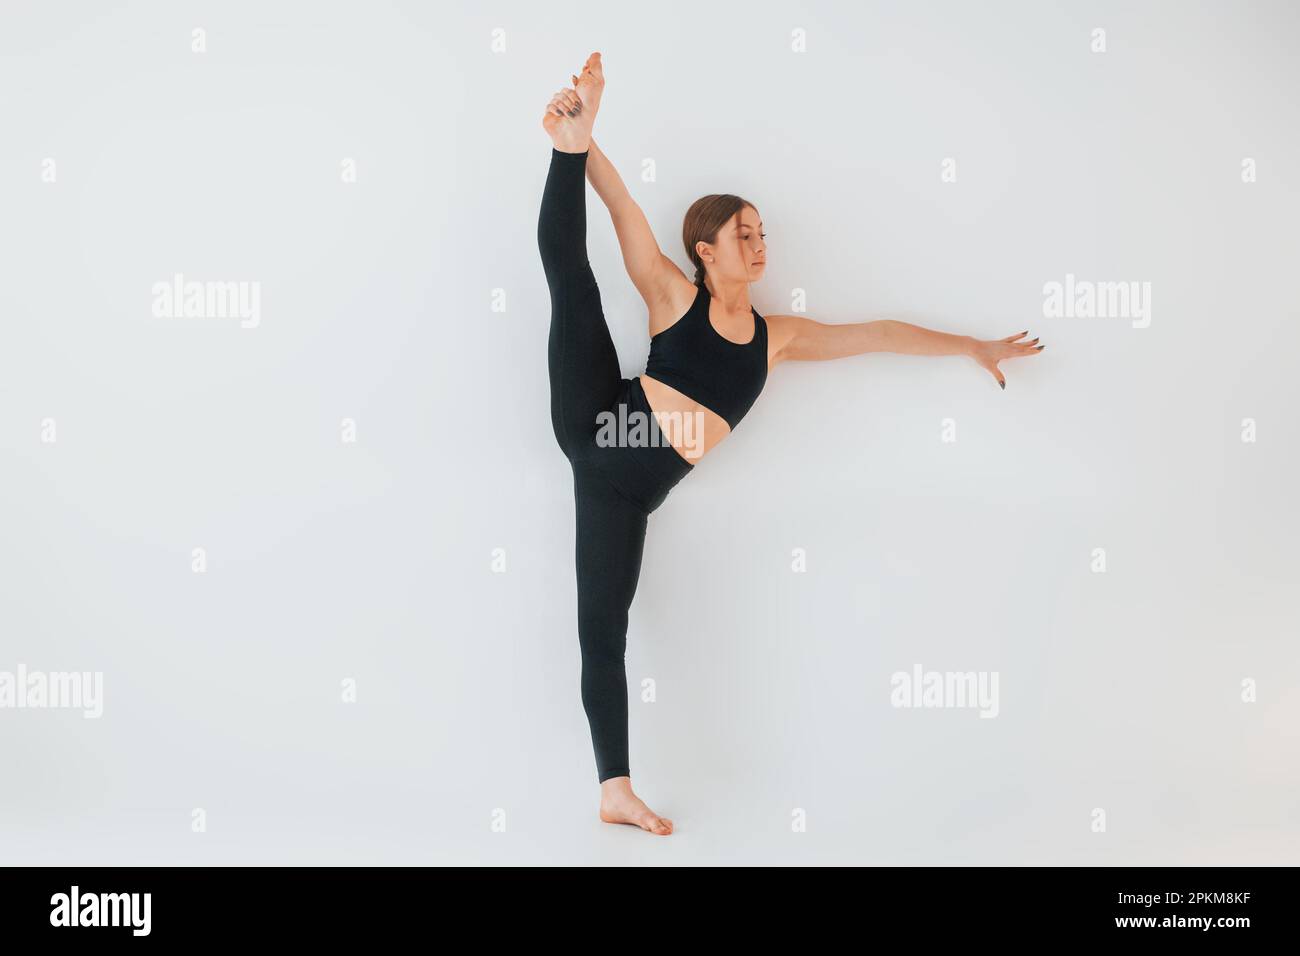 Exercises for the legs. Young woman in sportive clothes doing gymnastics indoors. Stock Photo